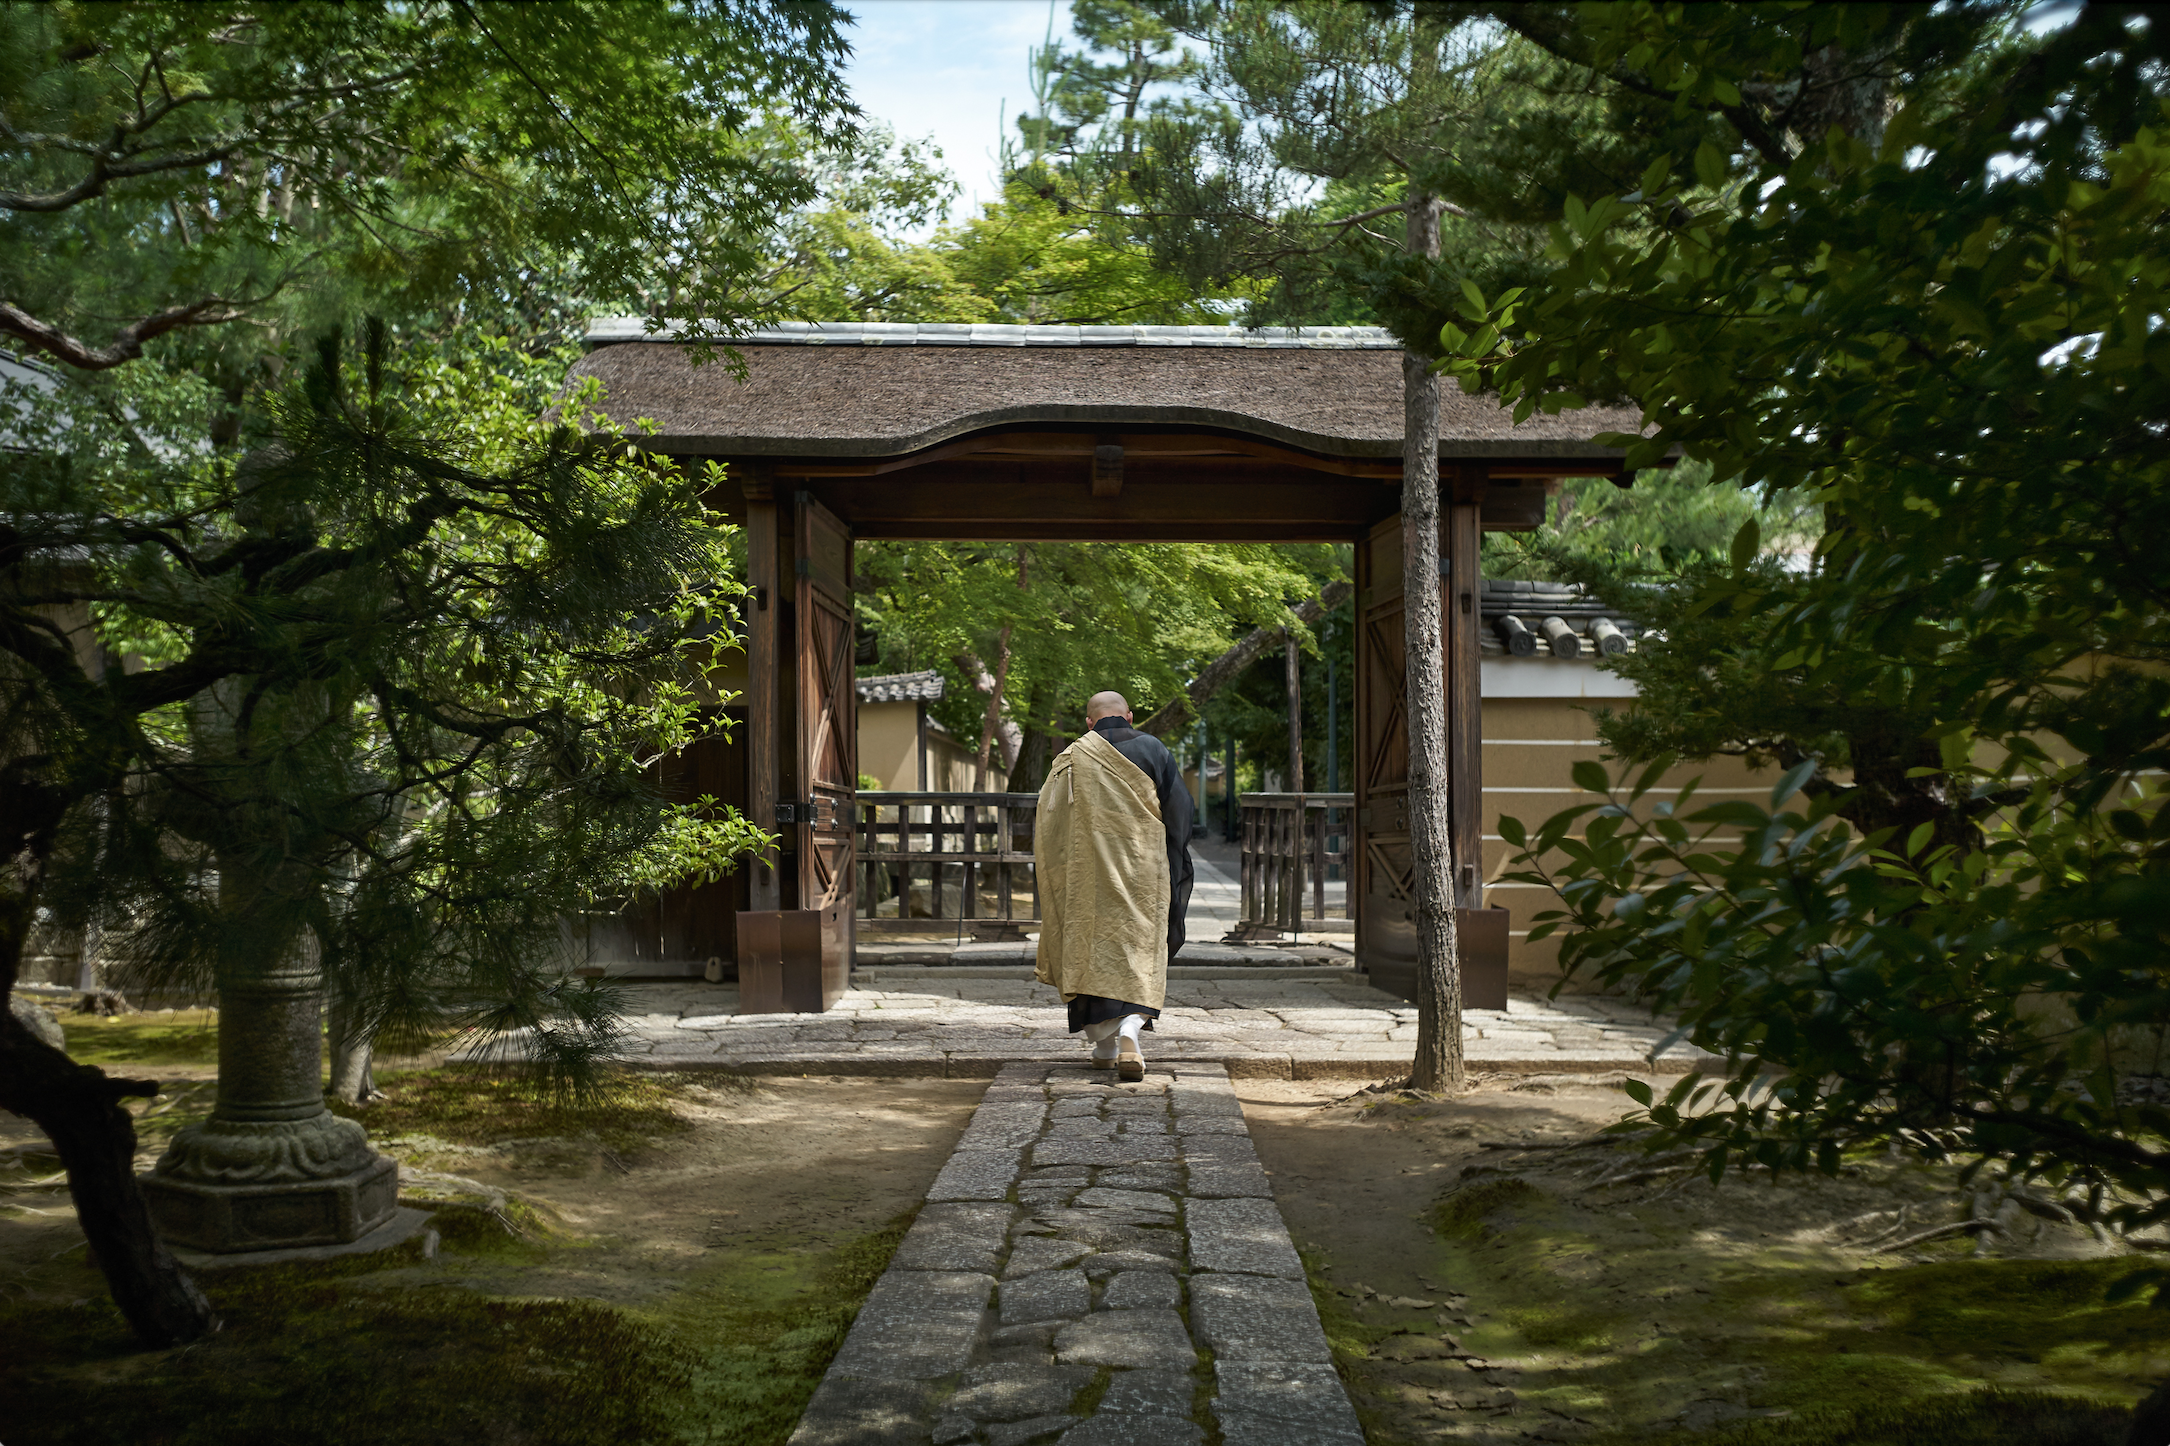 A robed man walks through a gate that has trees and greenery all around it.